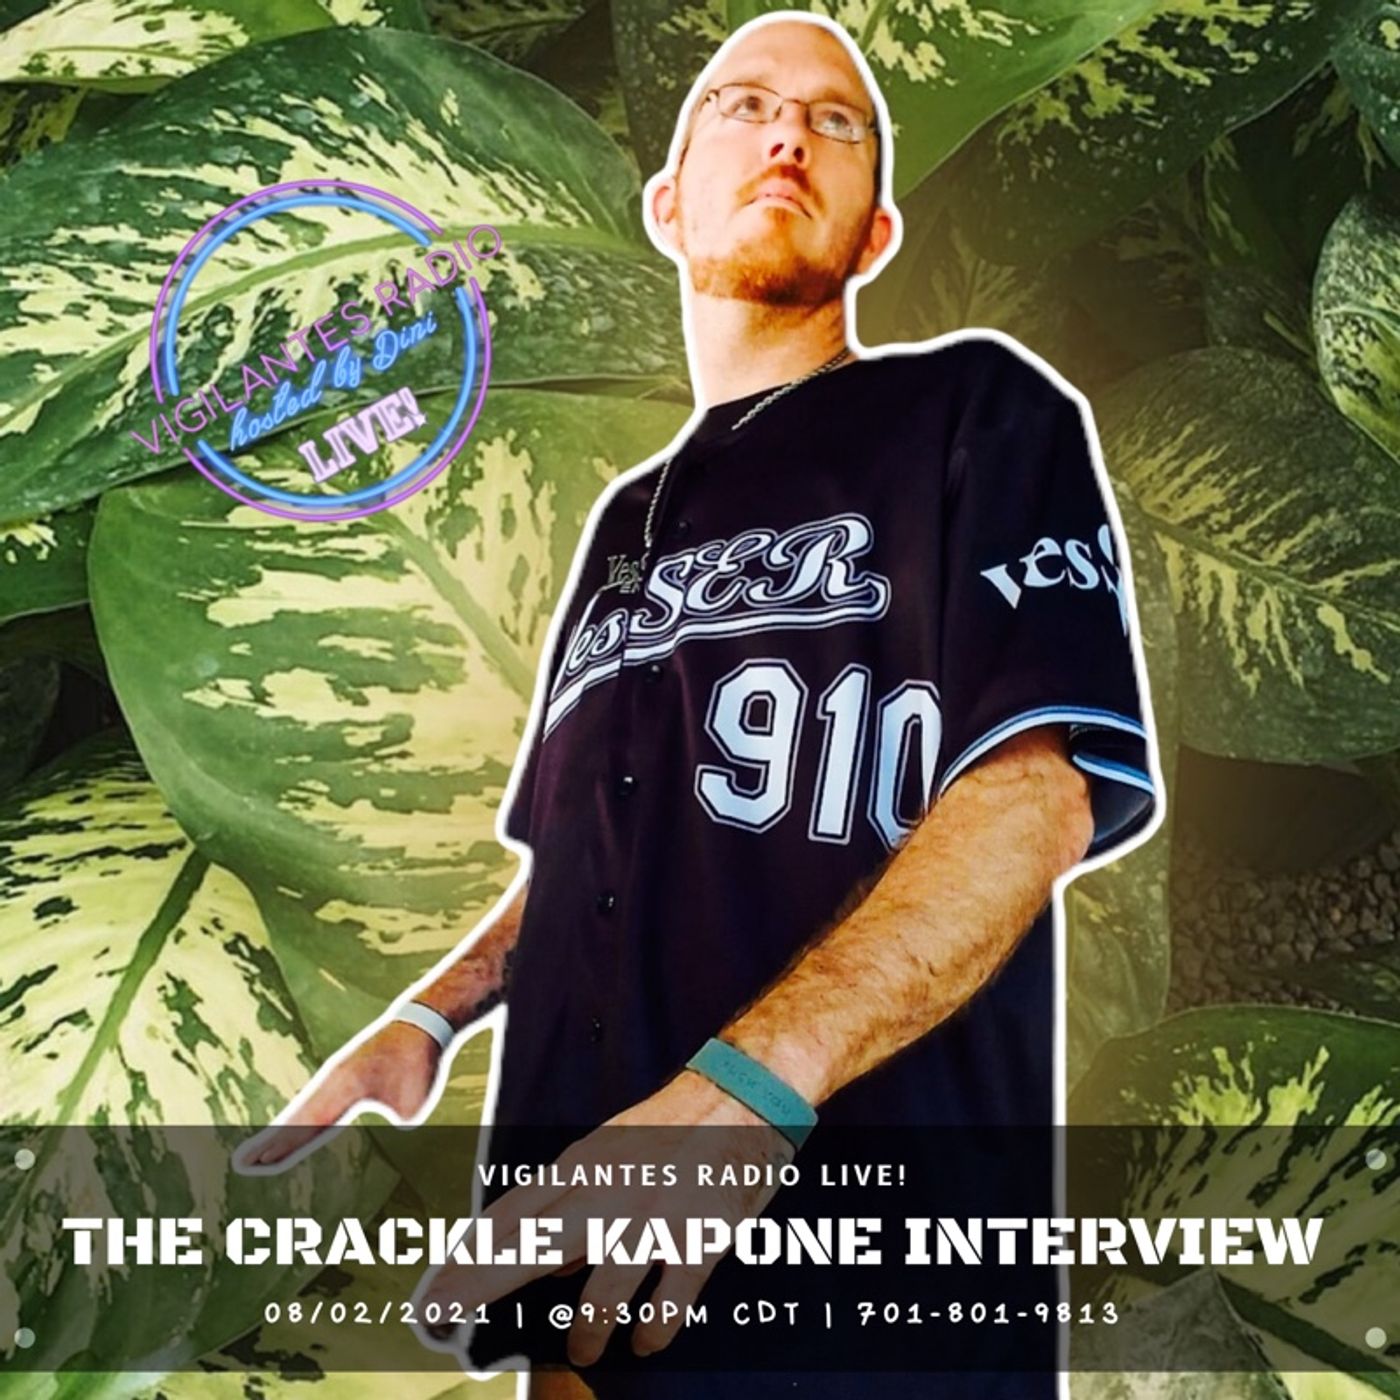 The Crackle Kapone Interview. Image